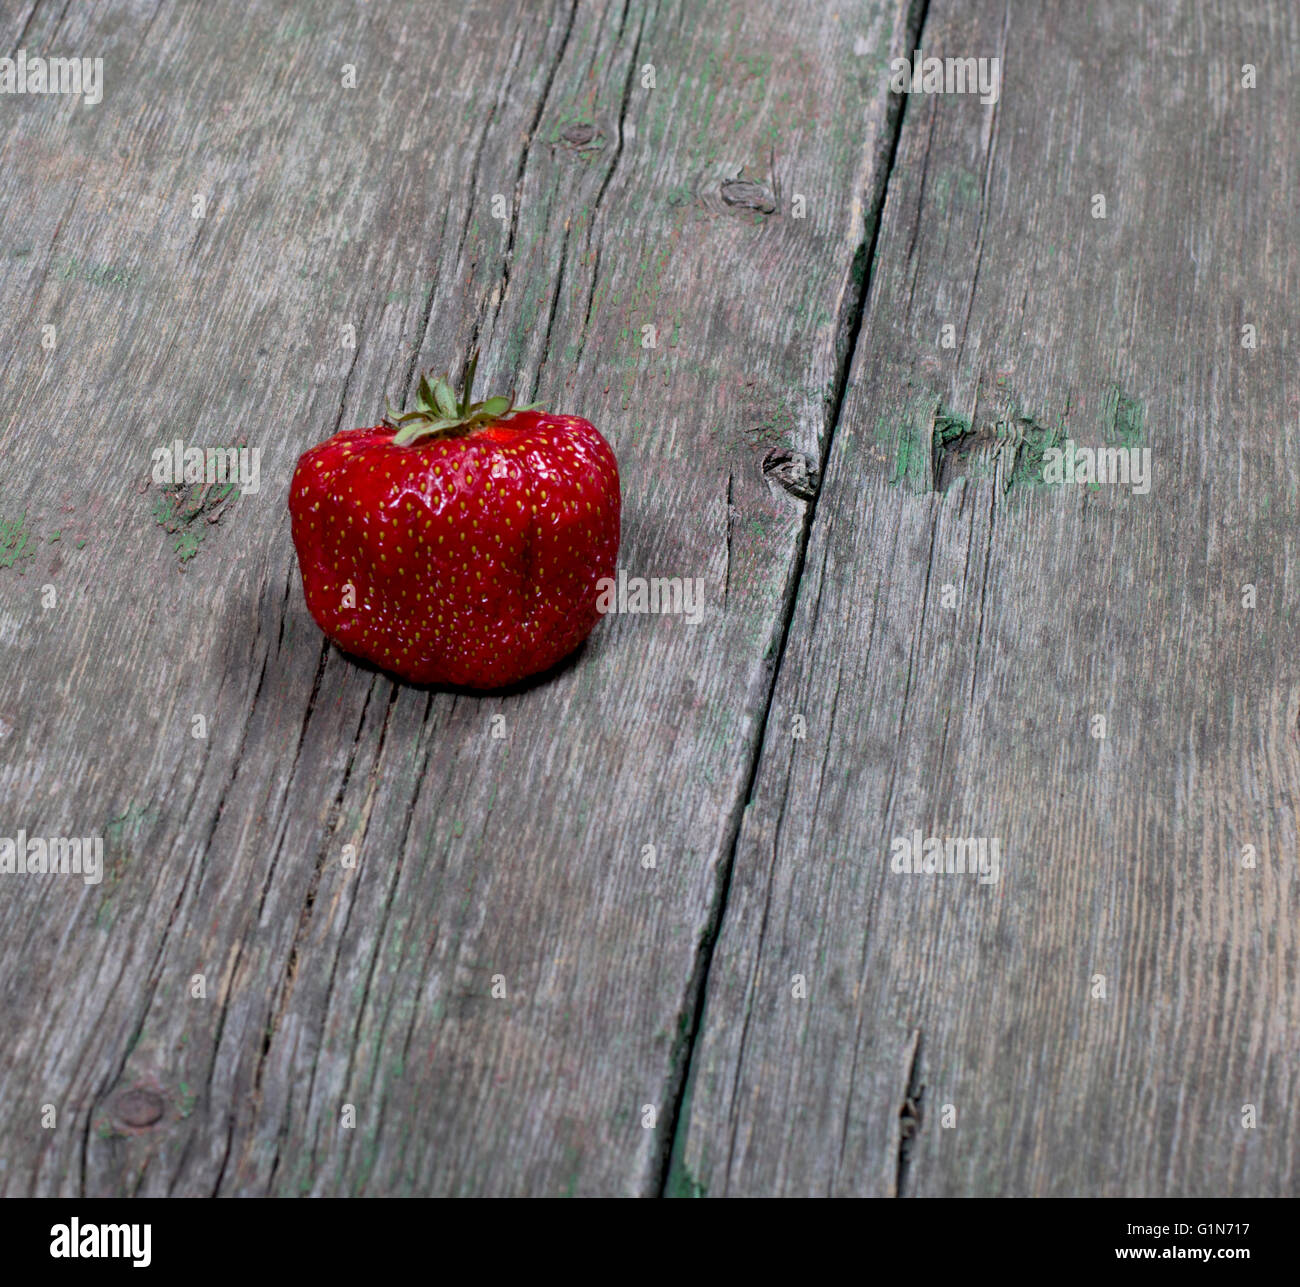 one big strawberry on a wooden table Stock Photo